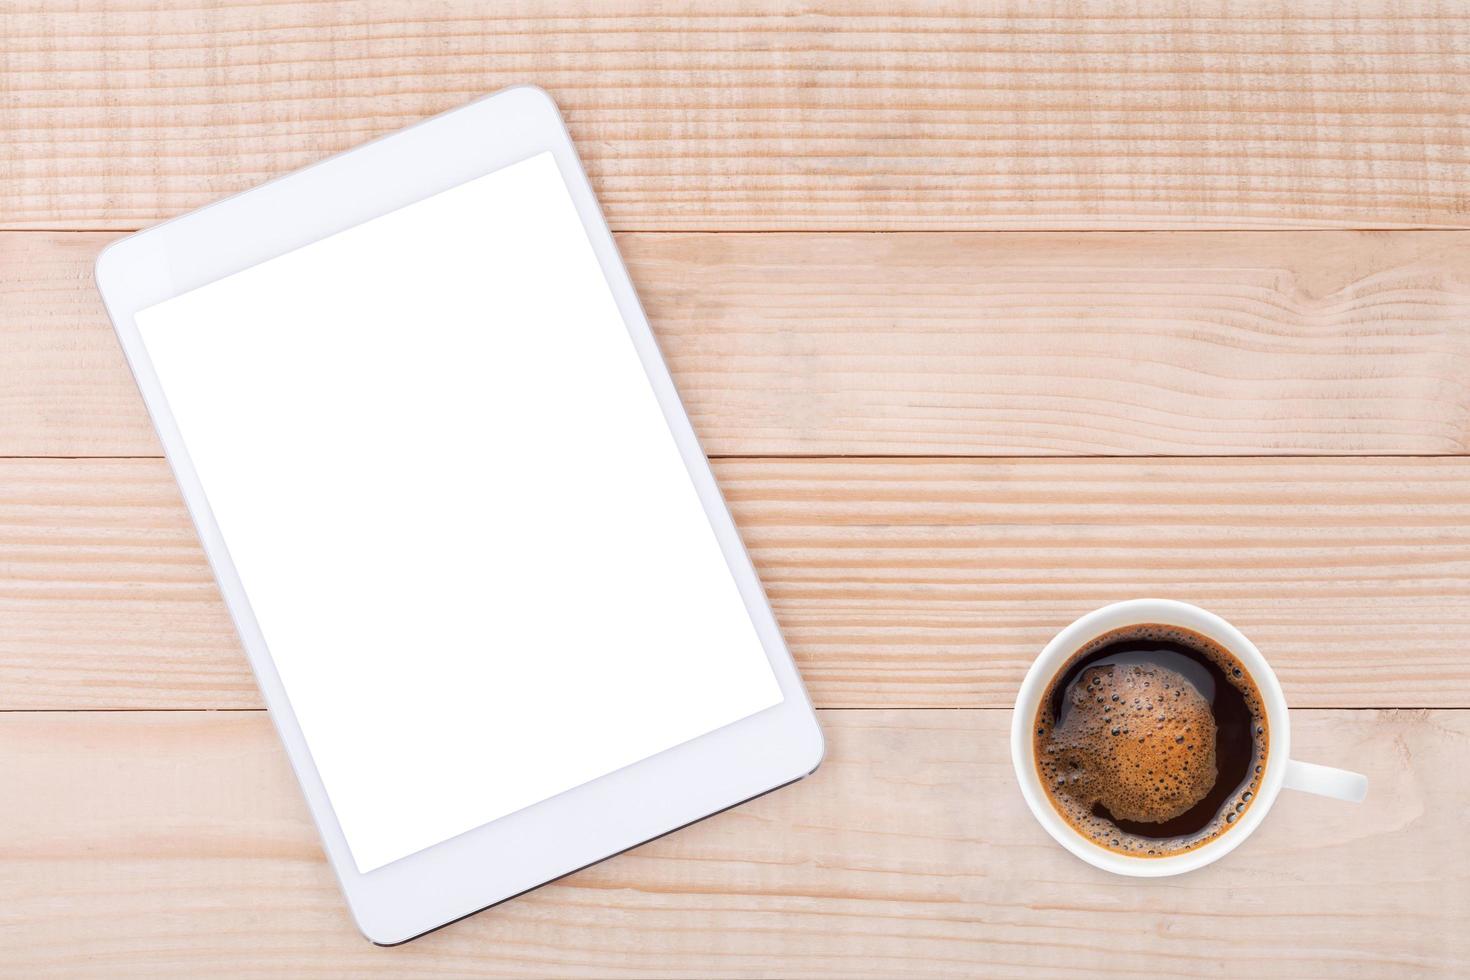 black coffee and Mobile phone or tablet with blank screen mockup wood background photo